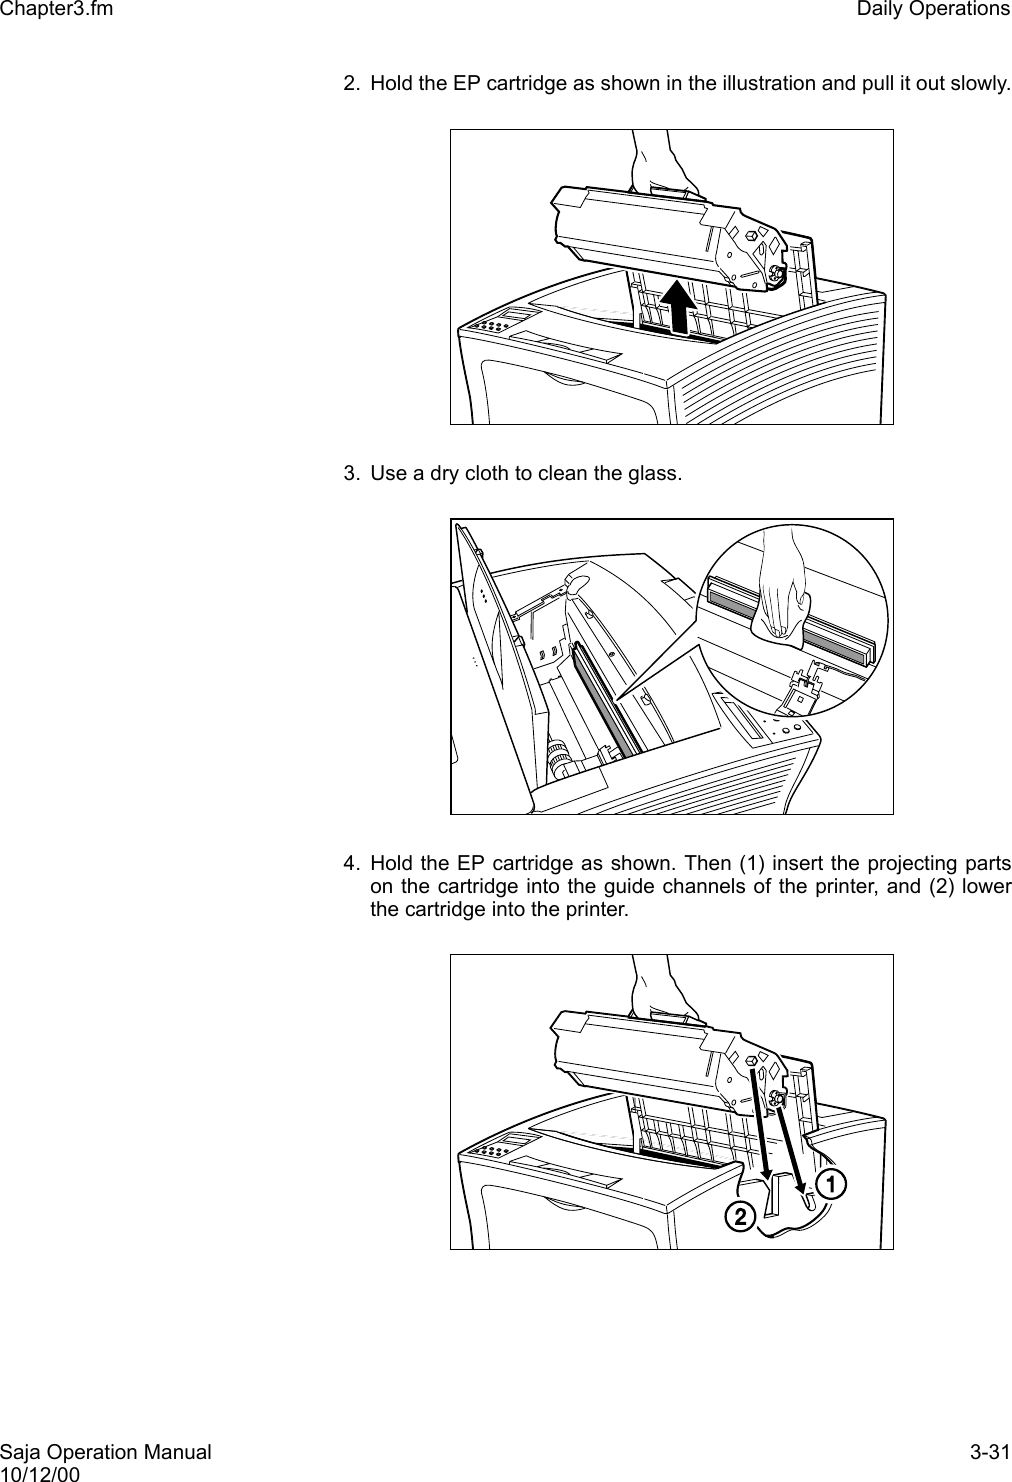 Saja Operation Manual 3-3110/12/00Chapter3.fm Daily Operations2. Hold the EP cartridge as shown in the illustration and pull it out slowly.3. Use a dry cloth to clean the glass.4. Hold the EP cartridge as shown. Then (1) insert the projecting partson the cartridge into the guide channels of the printer, and (2) lowerthe cartridge into the printer.